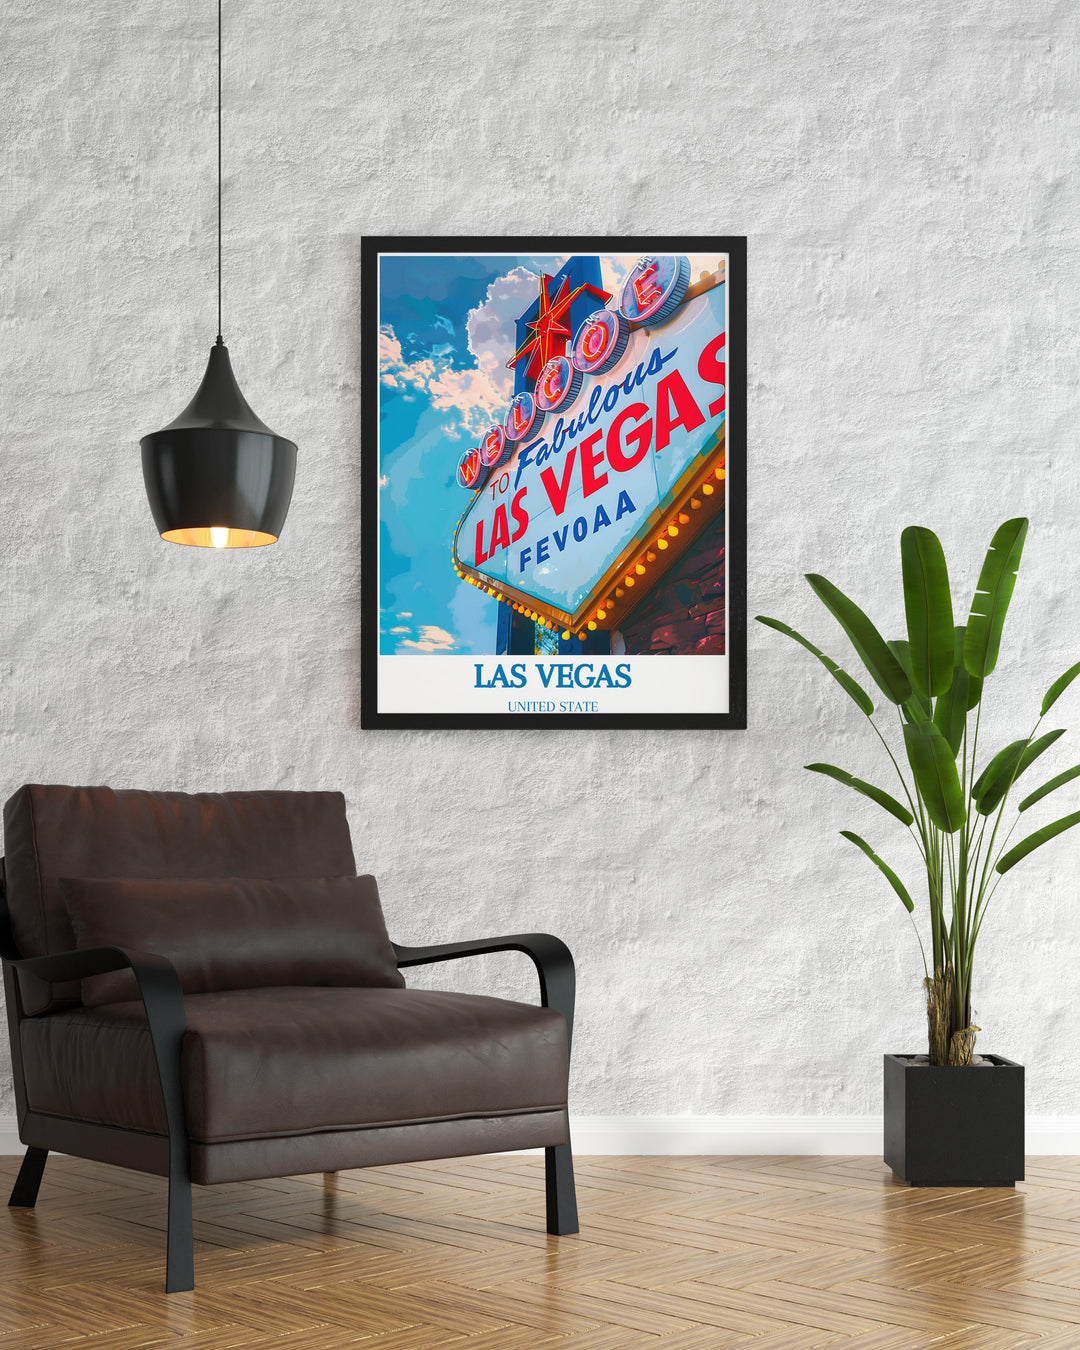 Las Vegas skyline print, ideal for bringing the excitement of Sin City into your living room or workspace.